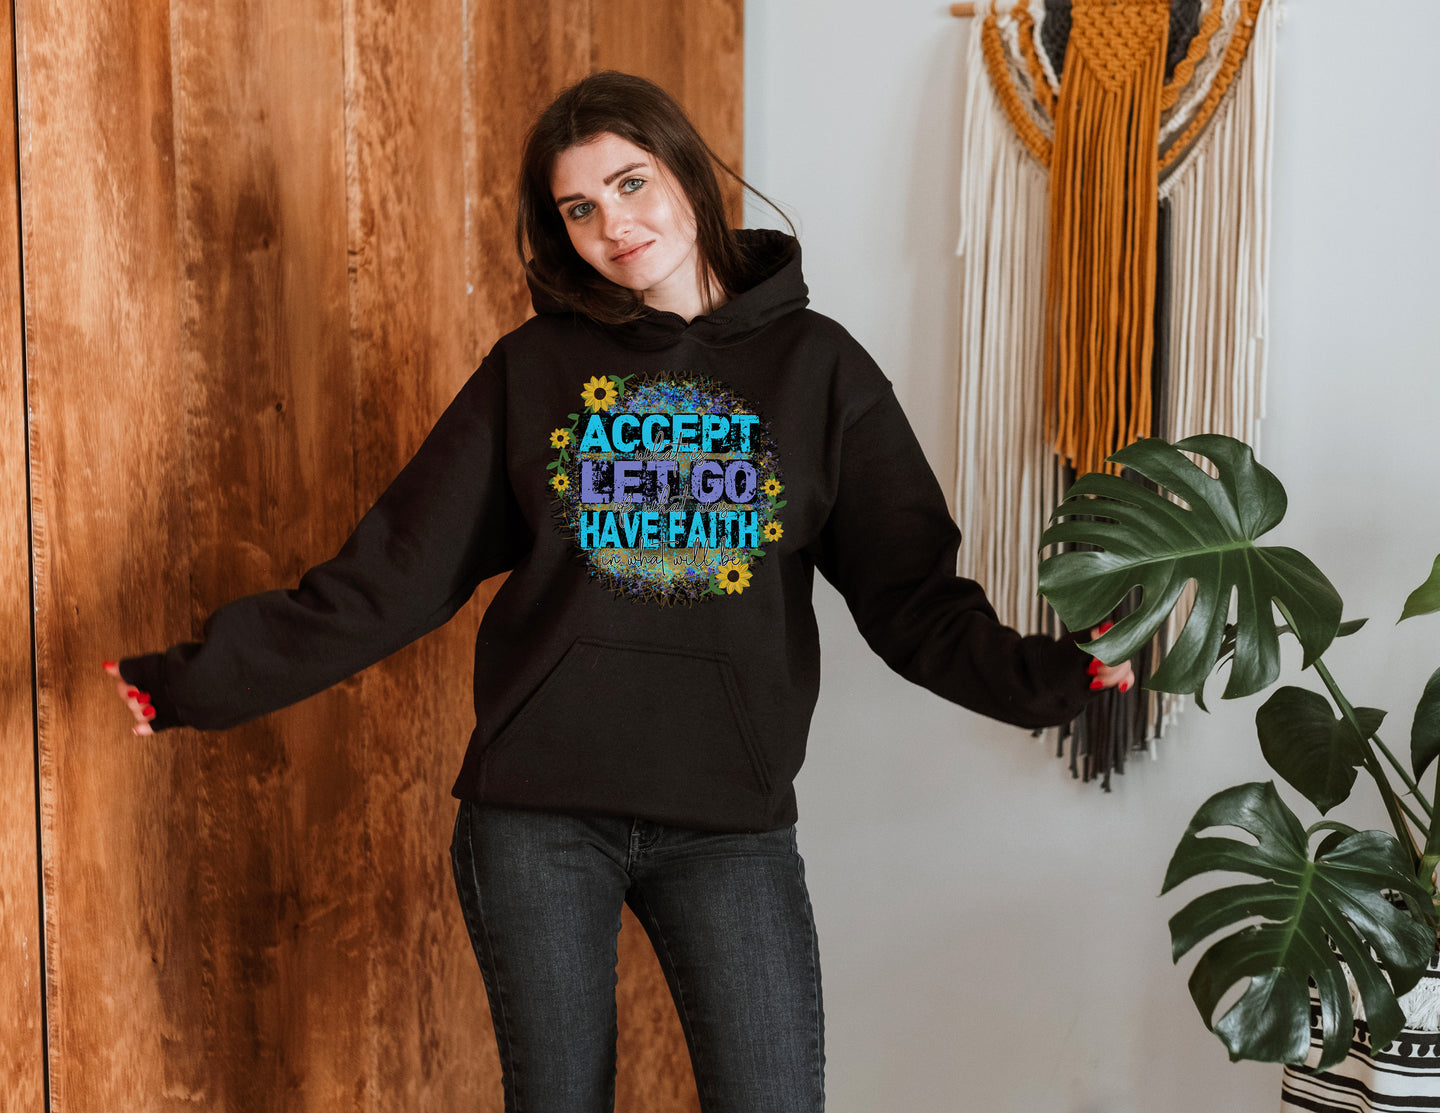 Woman posing in a black hoodie with a bright blue graphic print